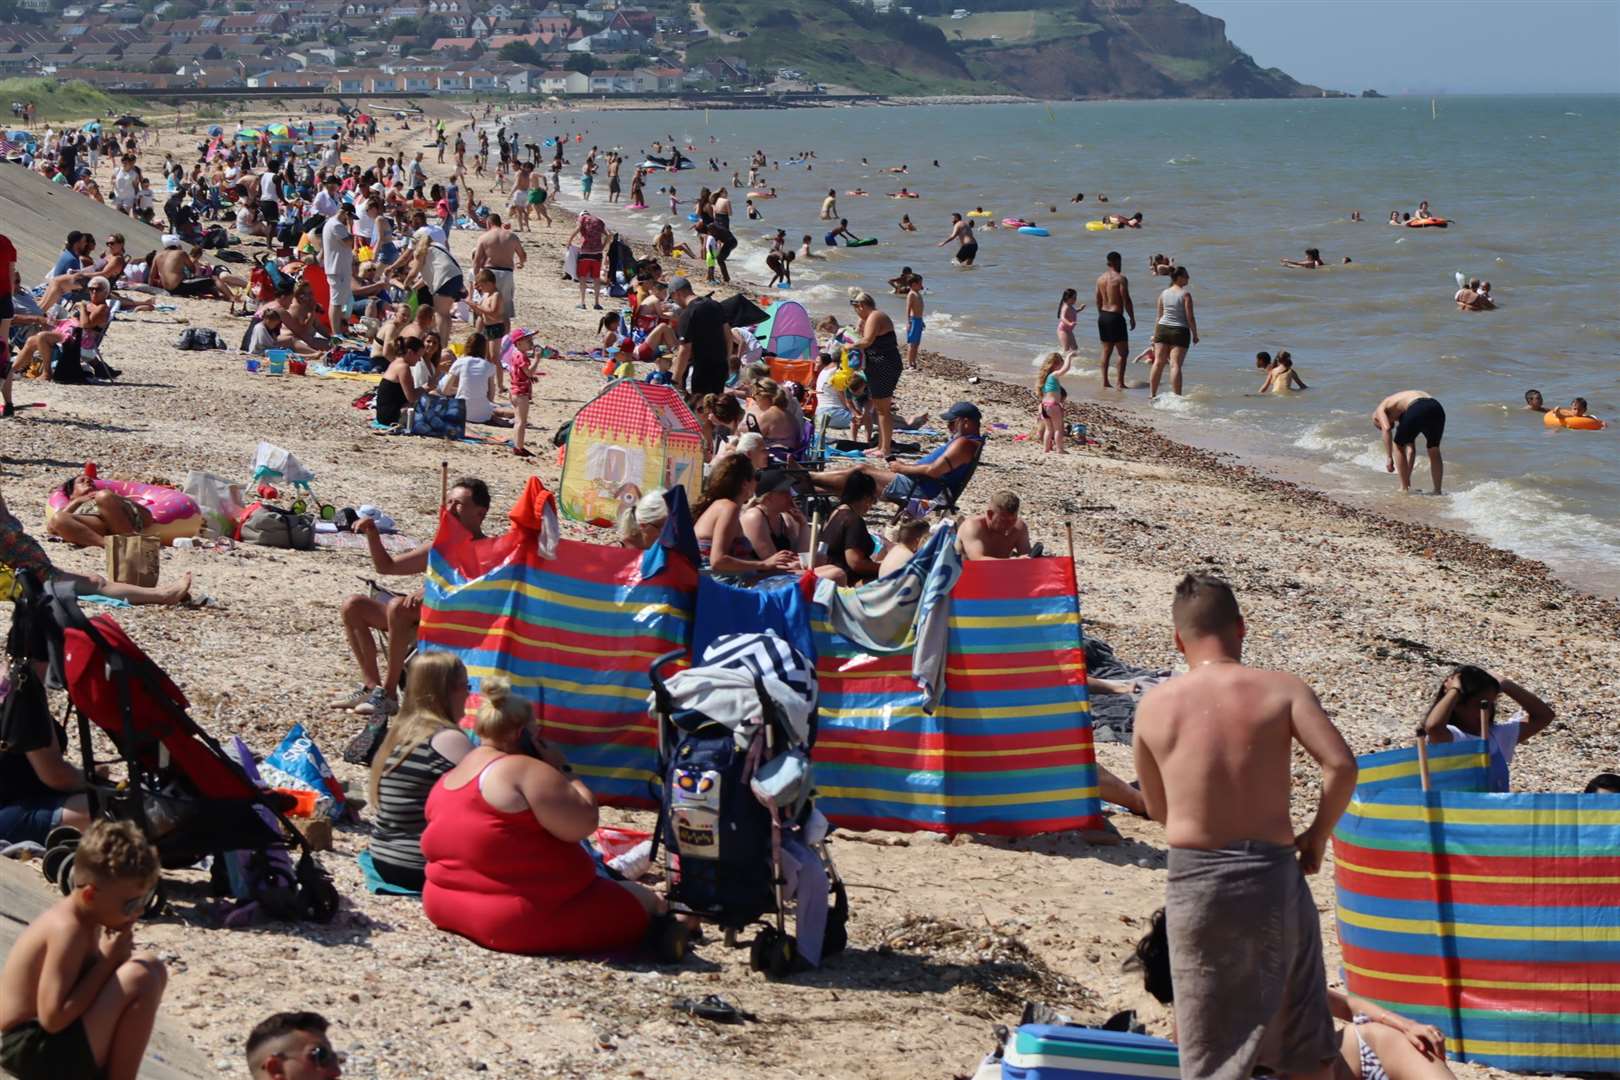 Day-trippers flocking to the seaside to soak up the sun at Leysdown on the Isle of Sheppey